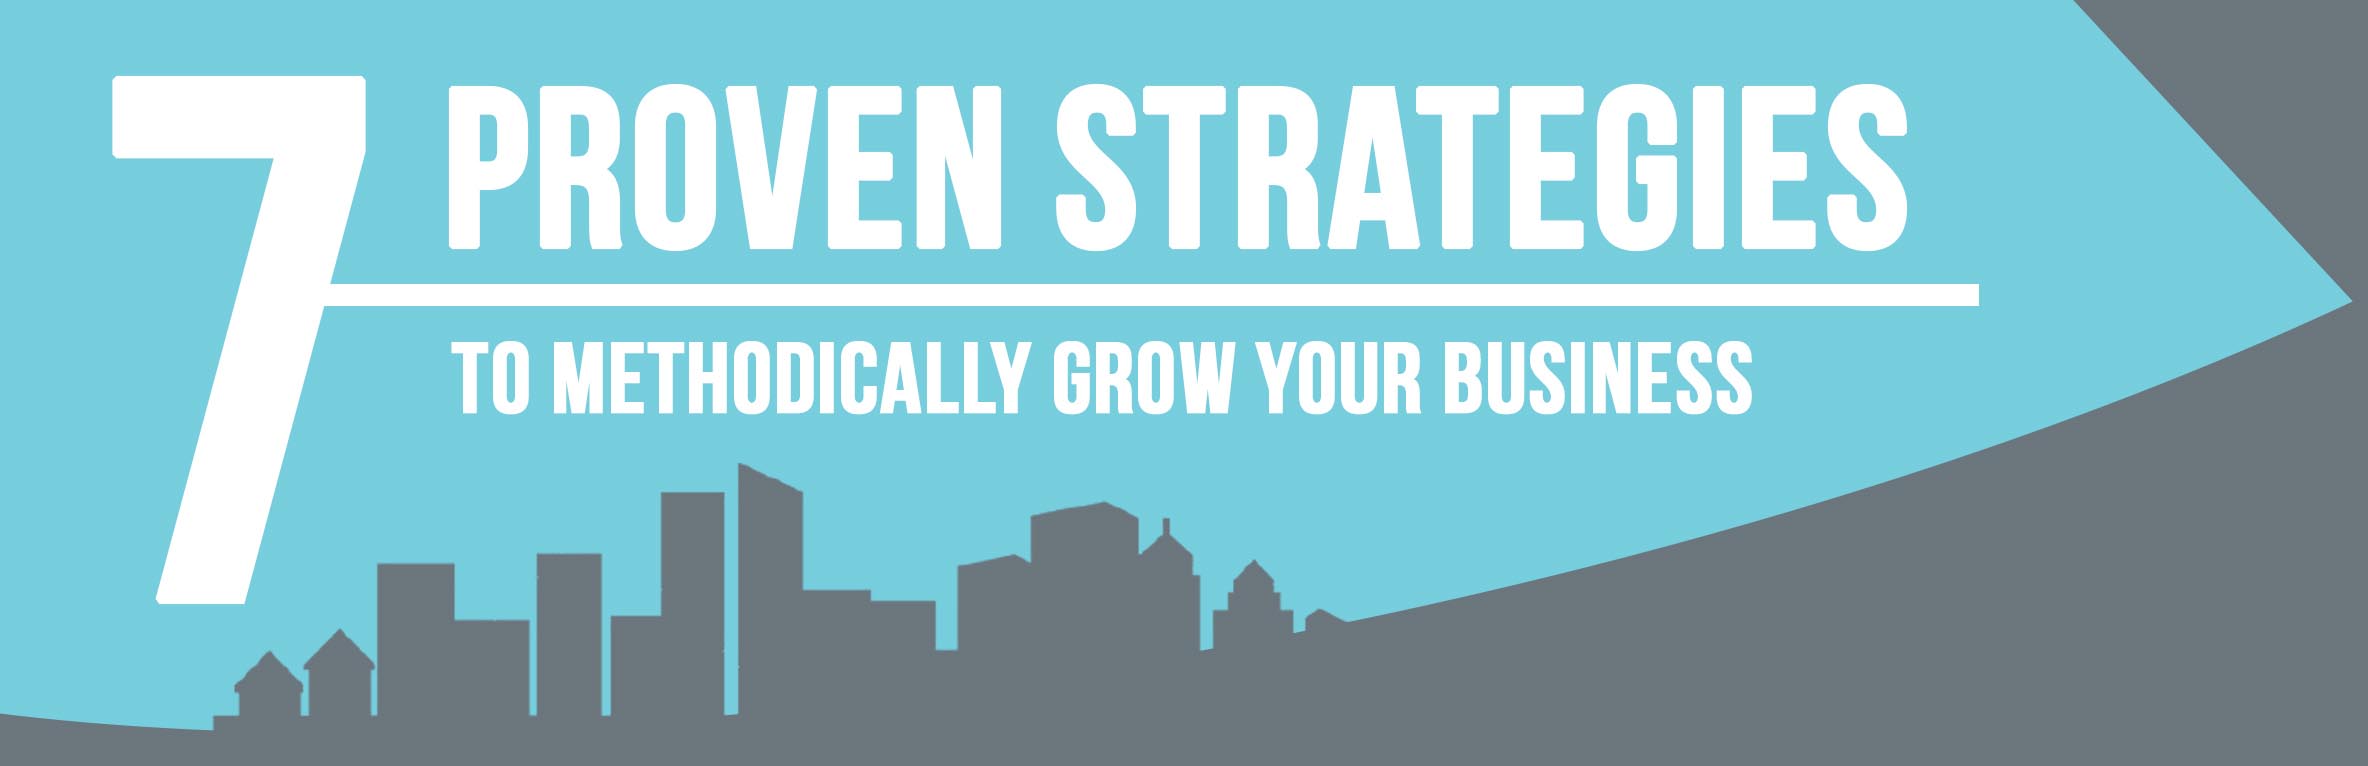 7_Proven_Strategies_to_Methodically_Grow_Your_Business_Header